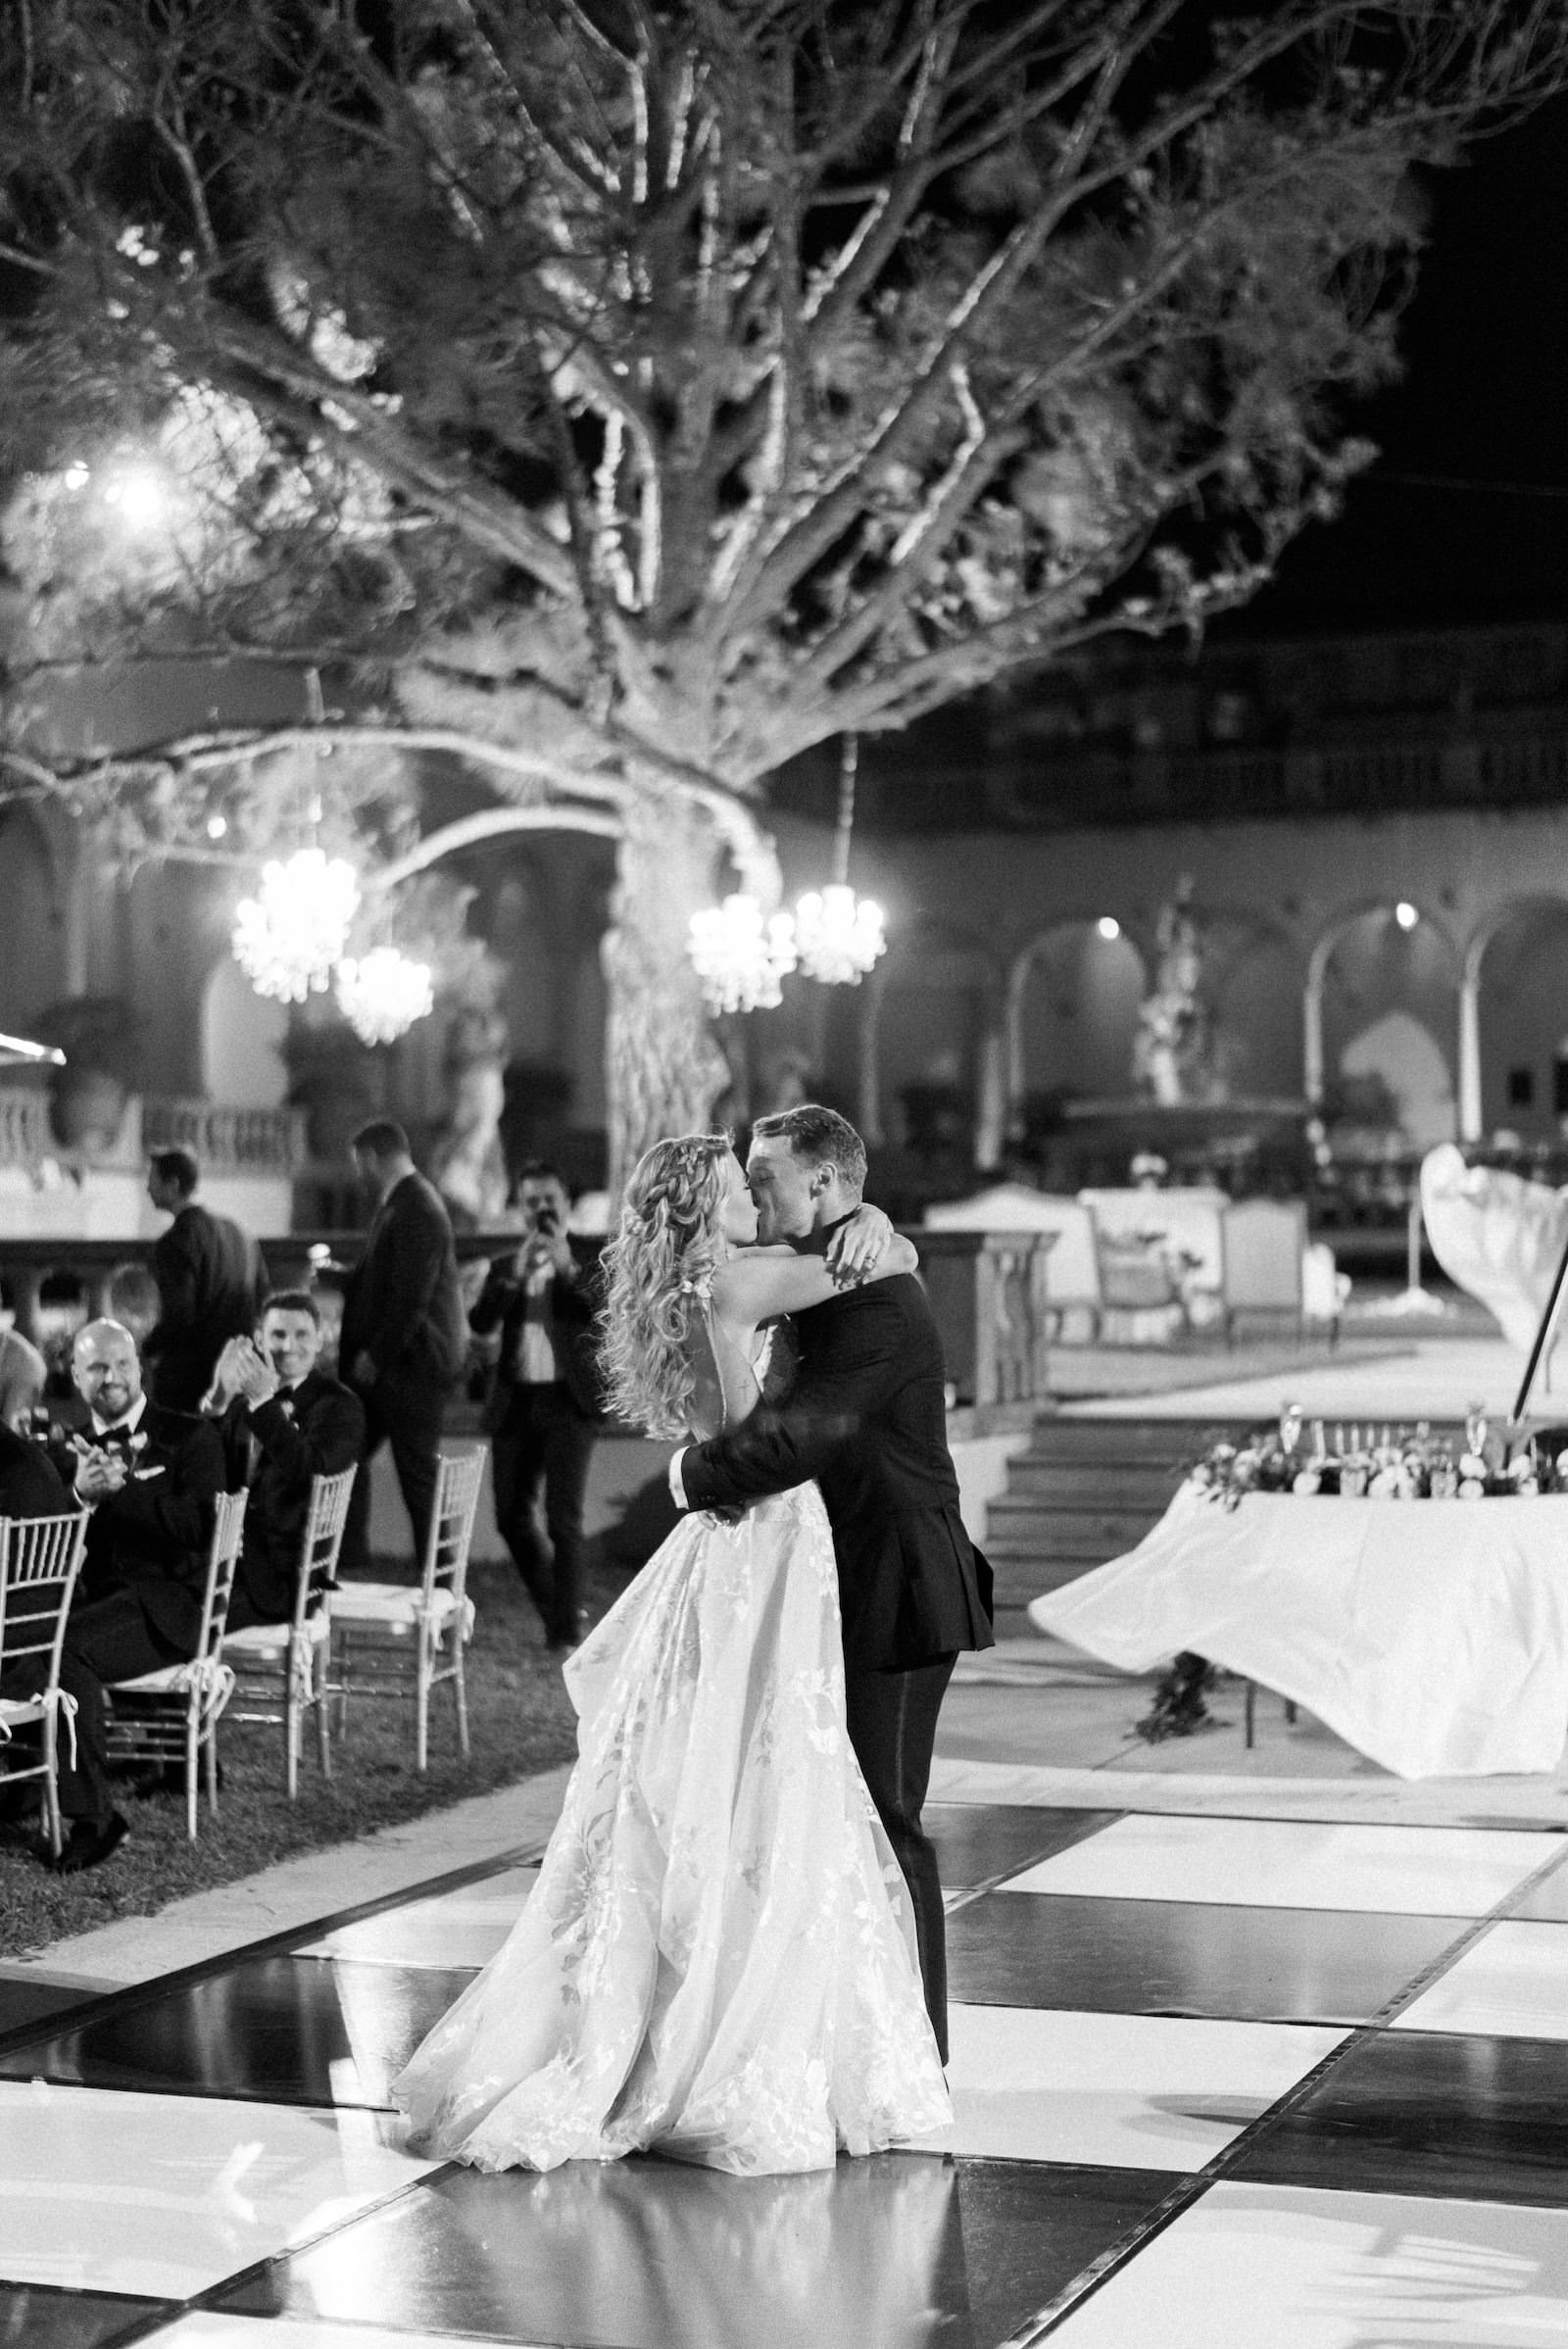 Sarasota Bride and Groom Kiss During First Dance During Outdoor Reception at The Museum of Art at the Ringling, On Black and White Dance Floor | Florida Wedding Planner NK Weddings